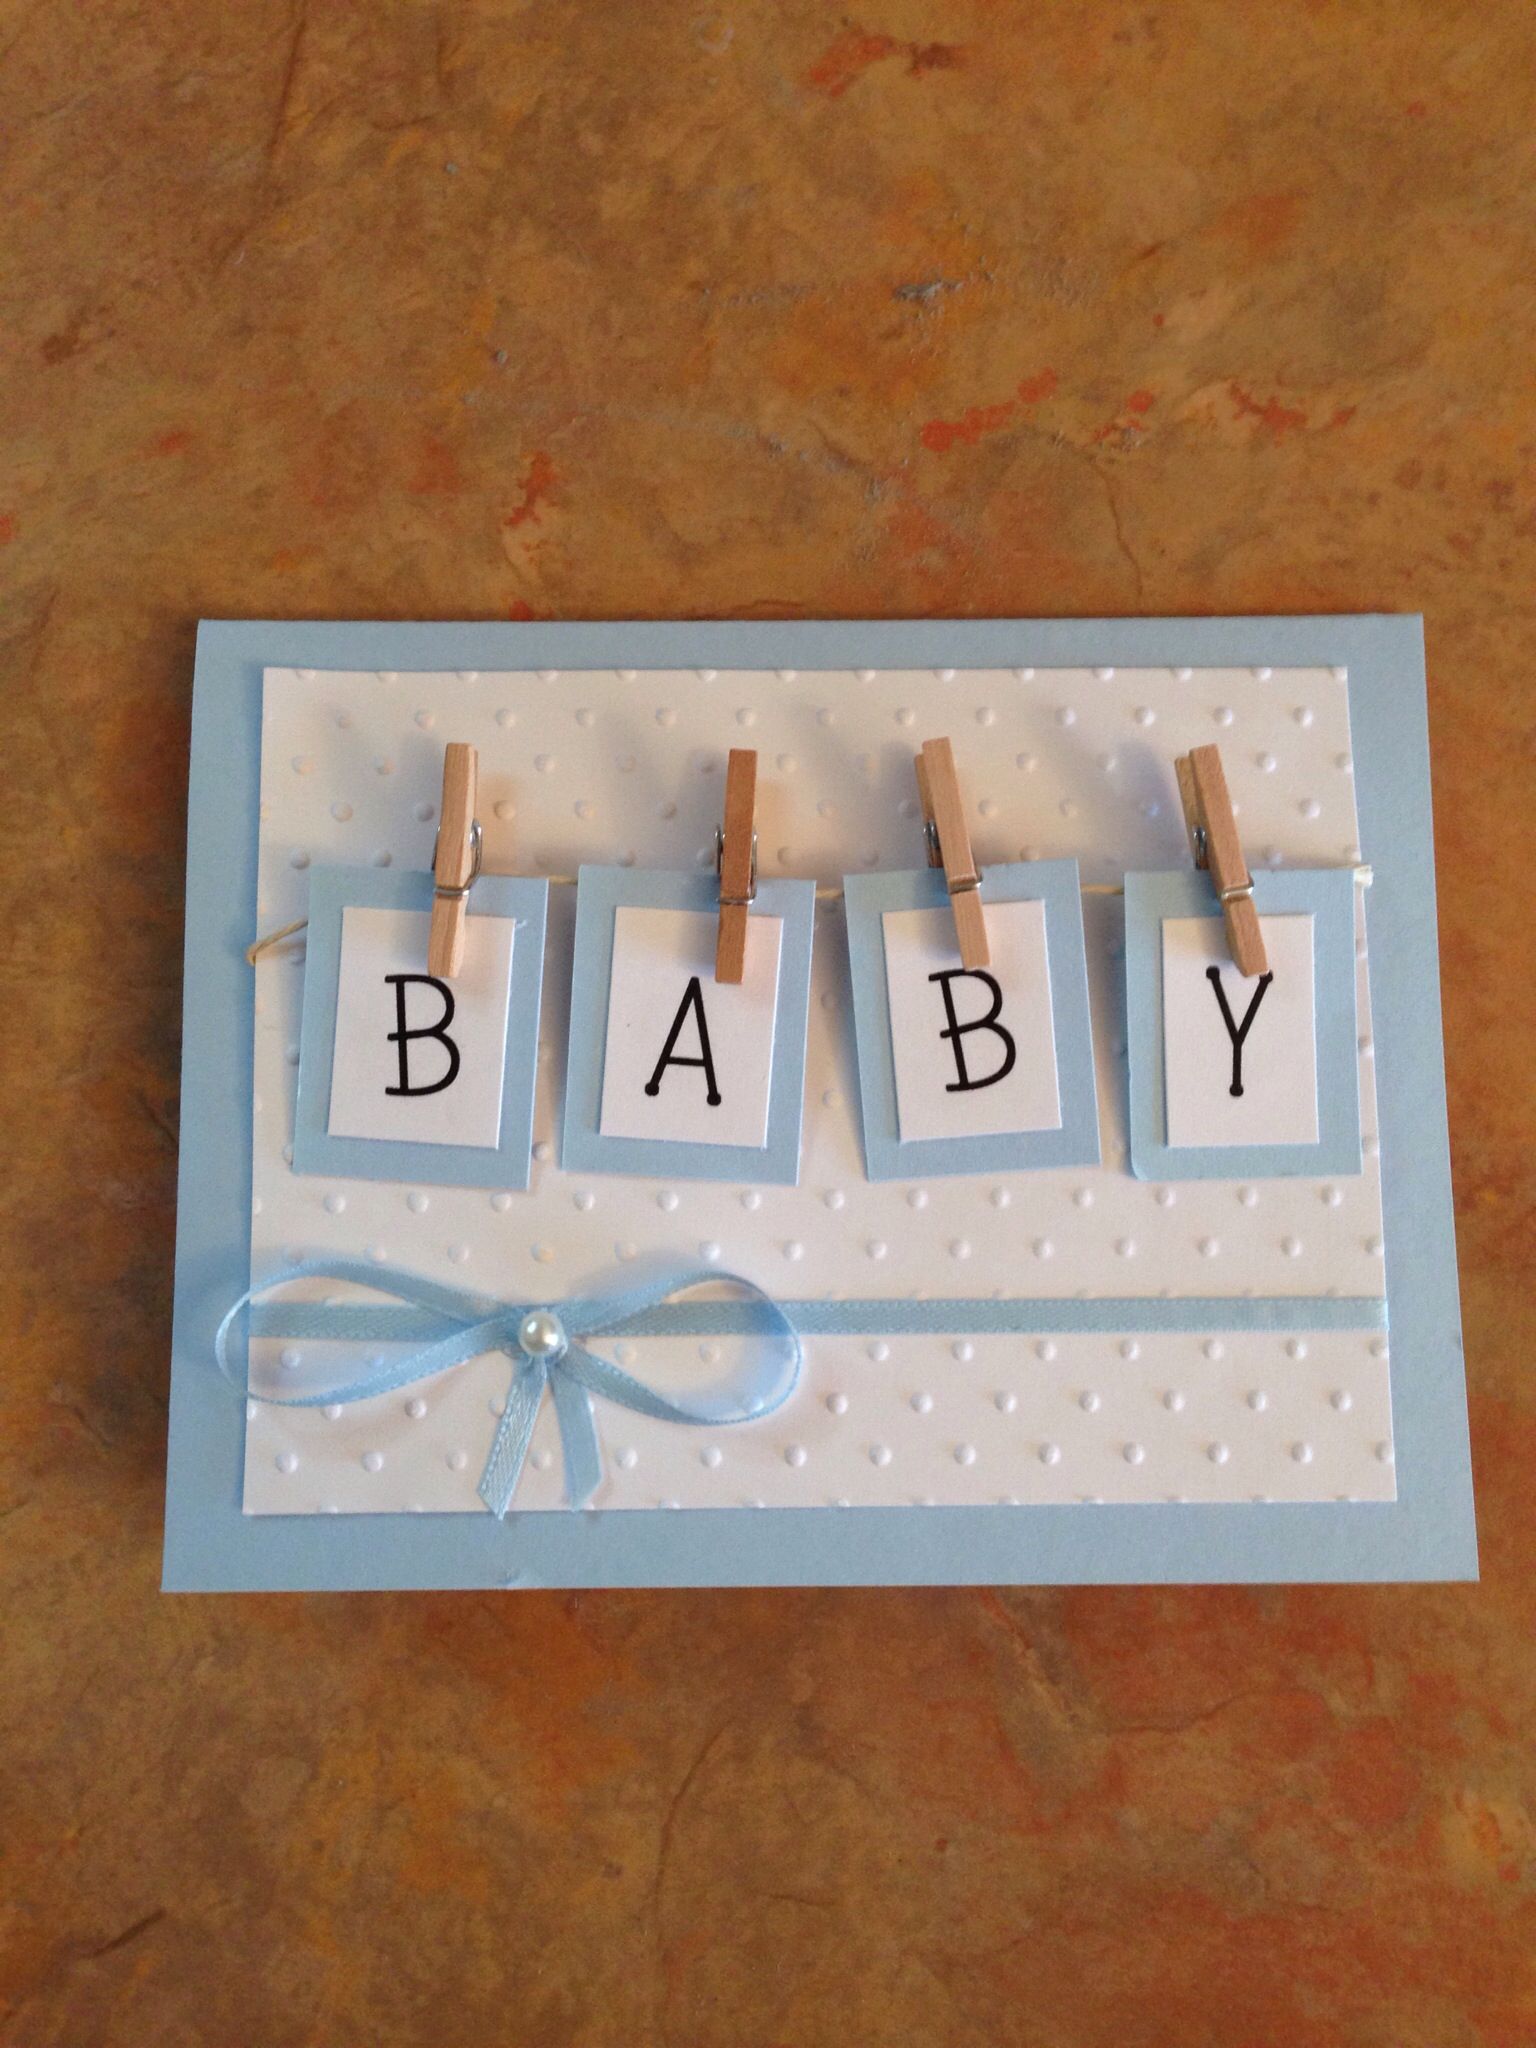 Full Size of Baby Shower:graceful Baby Shower Cards Image Designs Baby Shower Cards Cosas Para Baby Shower Baby Shower Diaper Game Articulos Para Baby Shower Baby Shower Supplies Arreglos De Baby Shower Baby Shower Games Handmade Baby Shower Card Tiny Clothespins Attach Bowith Baby Spelled Out Blue And White Could Be Changed To Yellow Pink Of Any Other Color